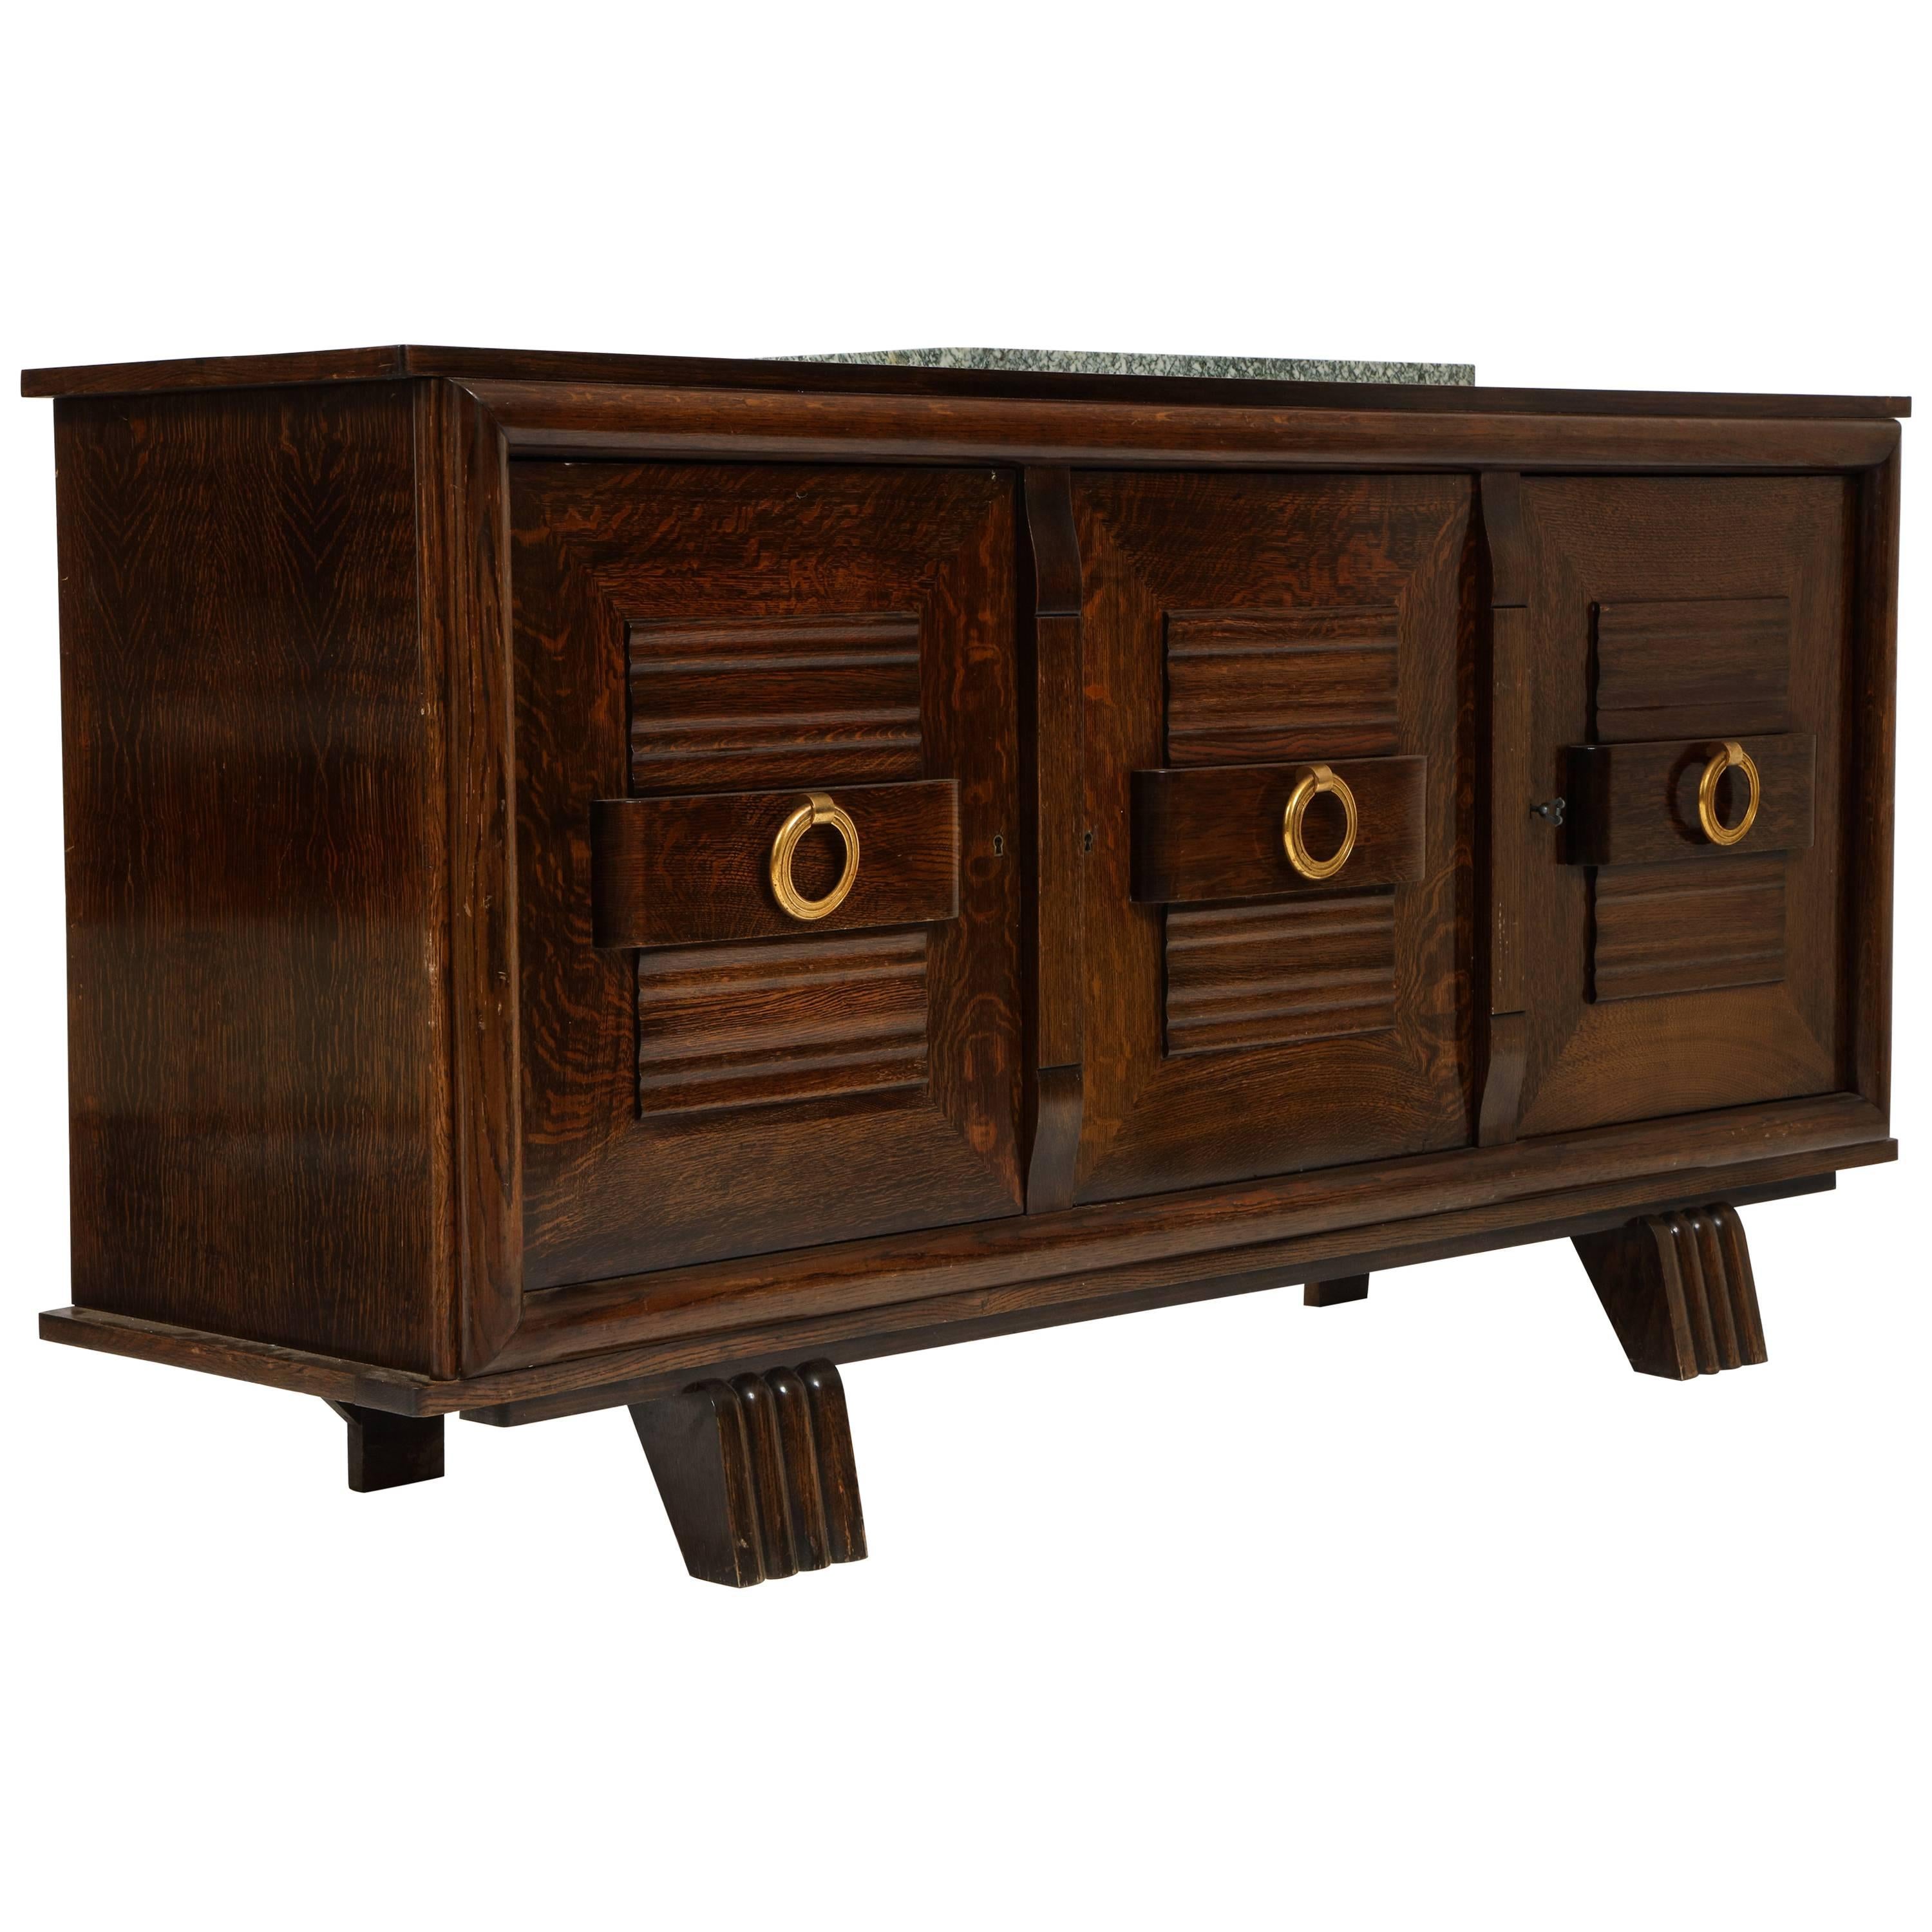 French Deco oak sideboard credenza brass pulls, Mid-Century, 1940s-1950s

This a beautiful and handsome oak sideboard with brass pulls and original keys.
Original Green marble on top. This item is in very good original condition with beautiful